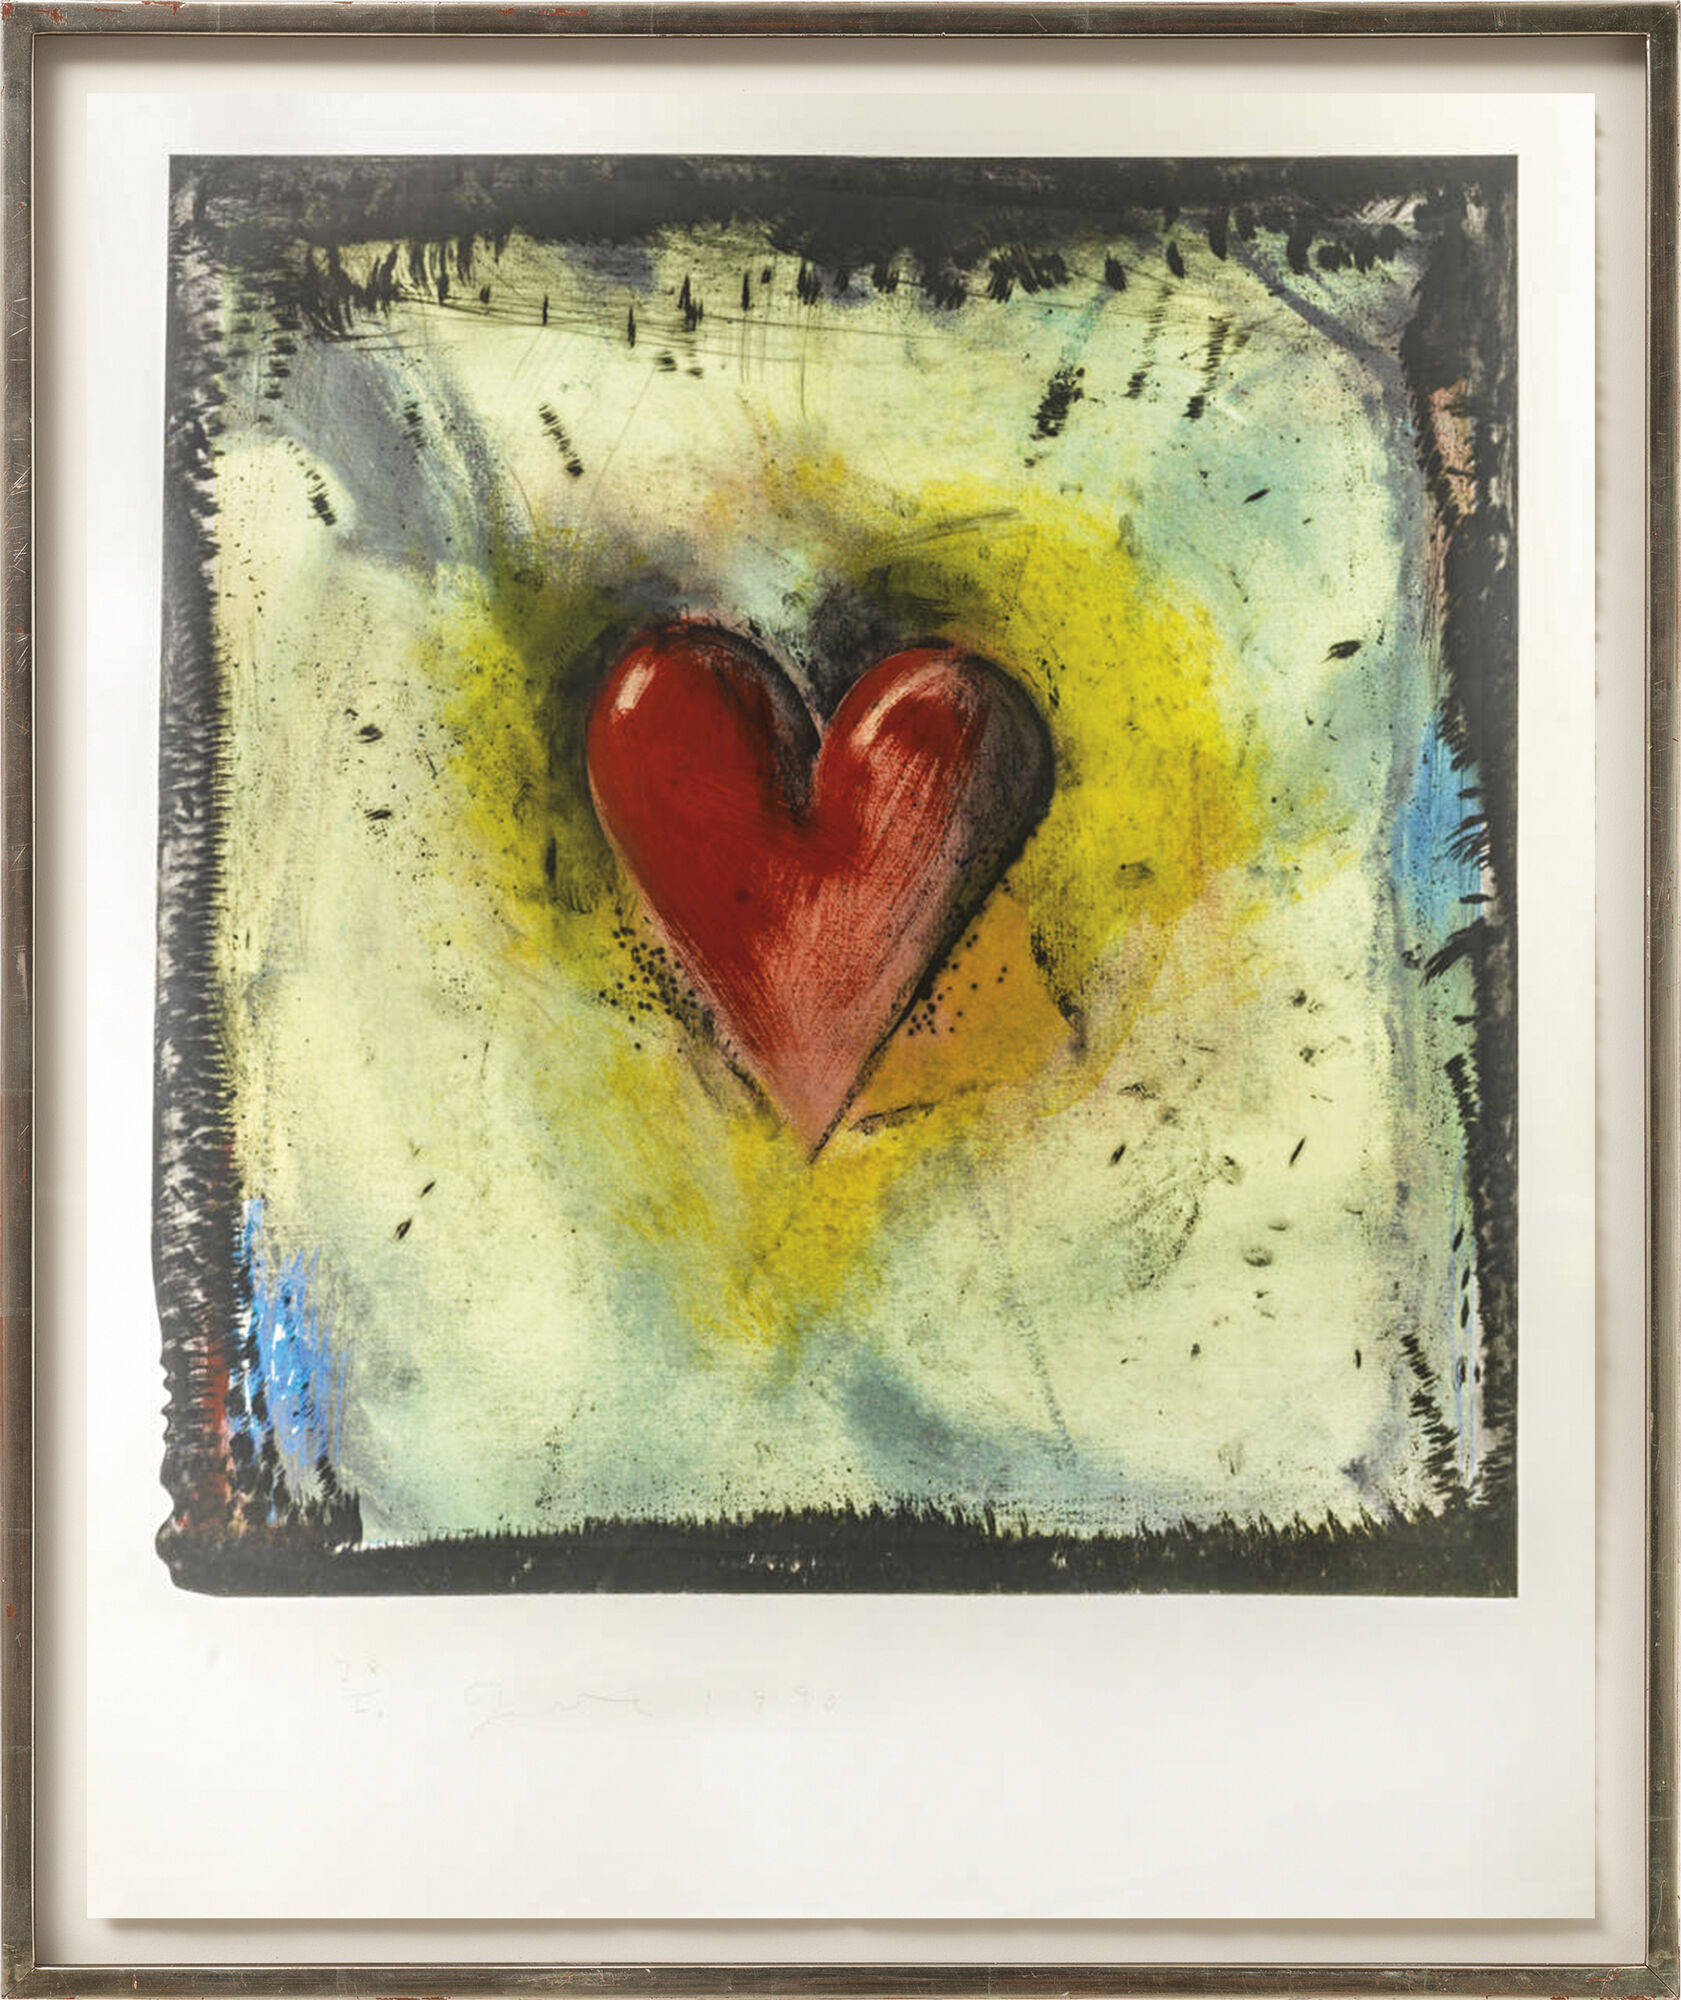 Picture "The Hand-Coloured Viennese Hearts IV" (1990) by Jim Dine